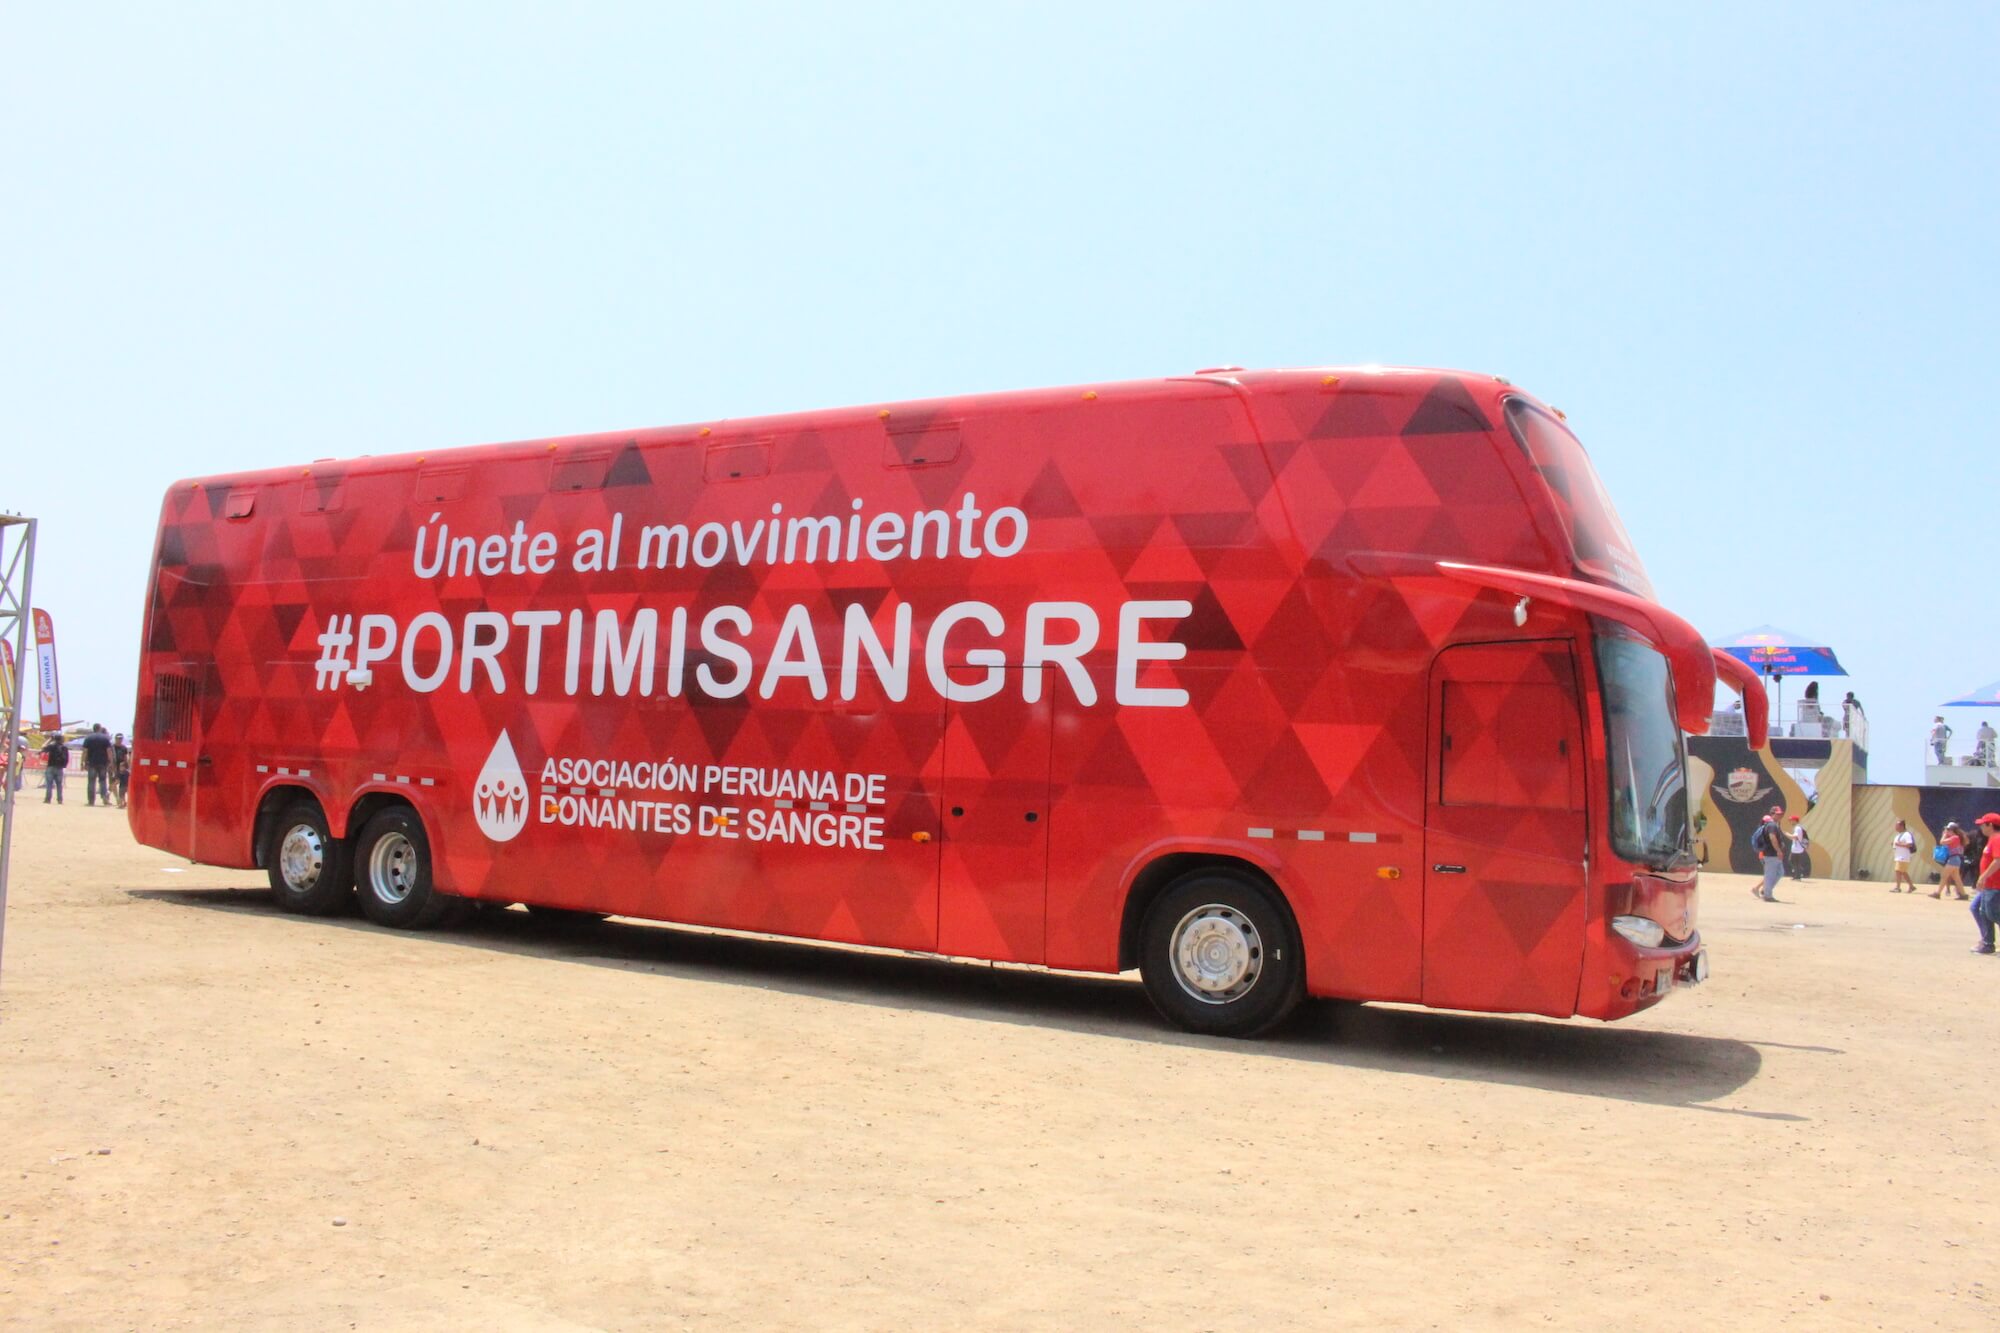 Peru's First Mobile Blood Bank: Two Family Businesses Join Forces to Save Lives